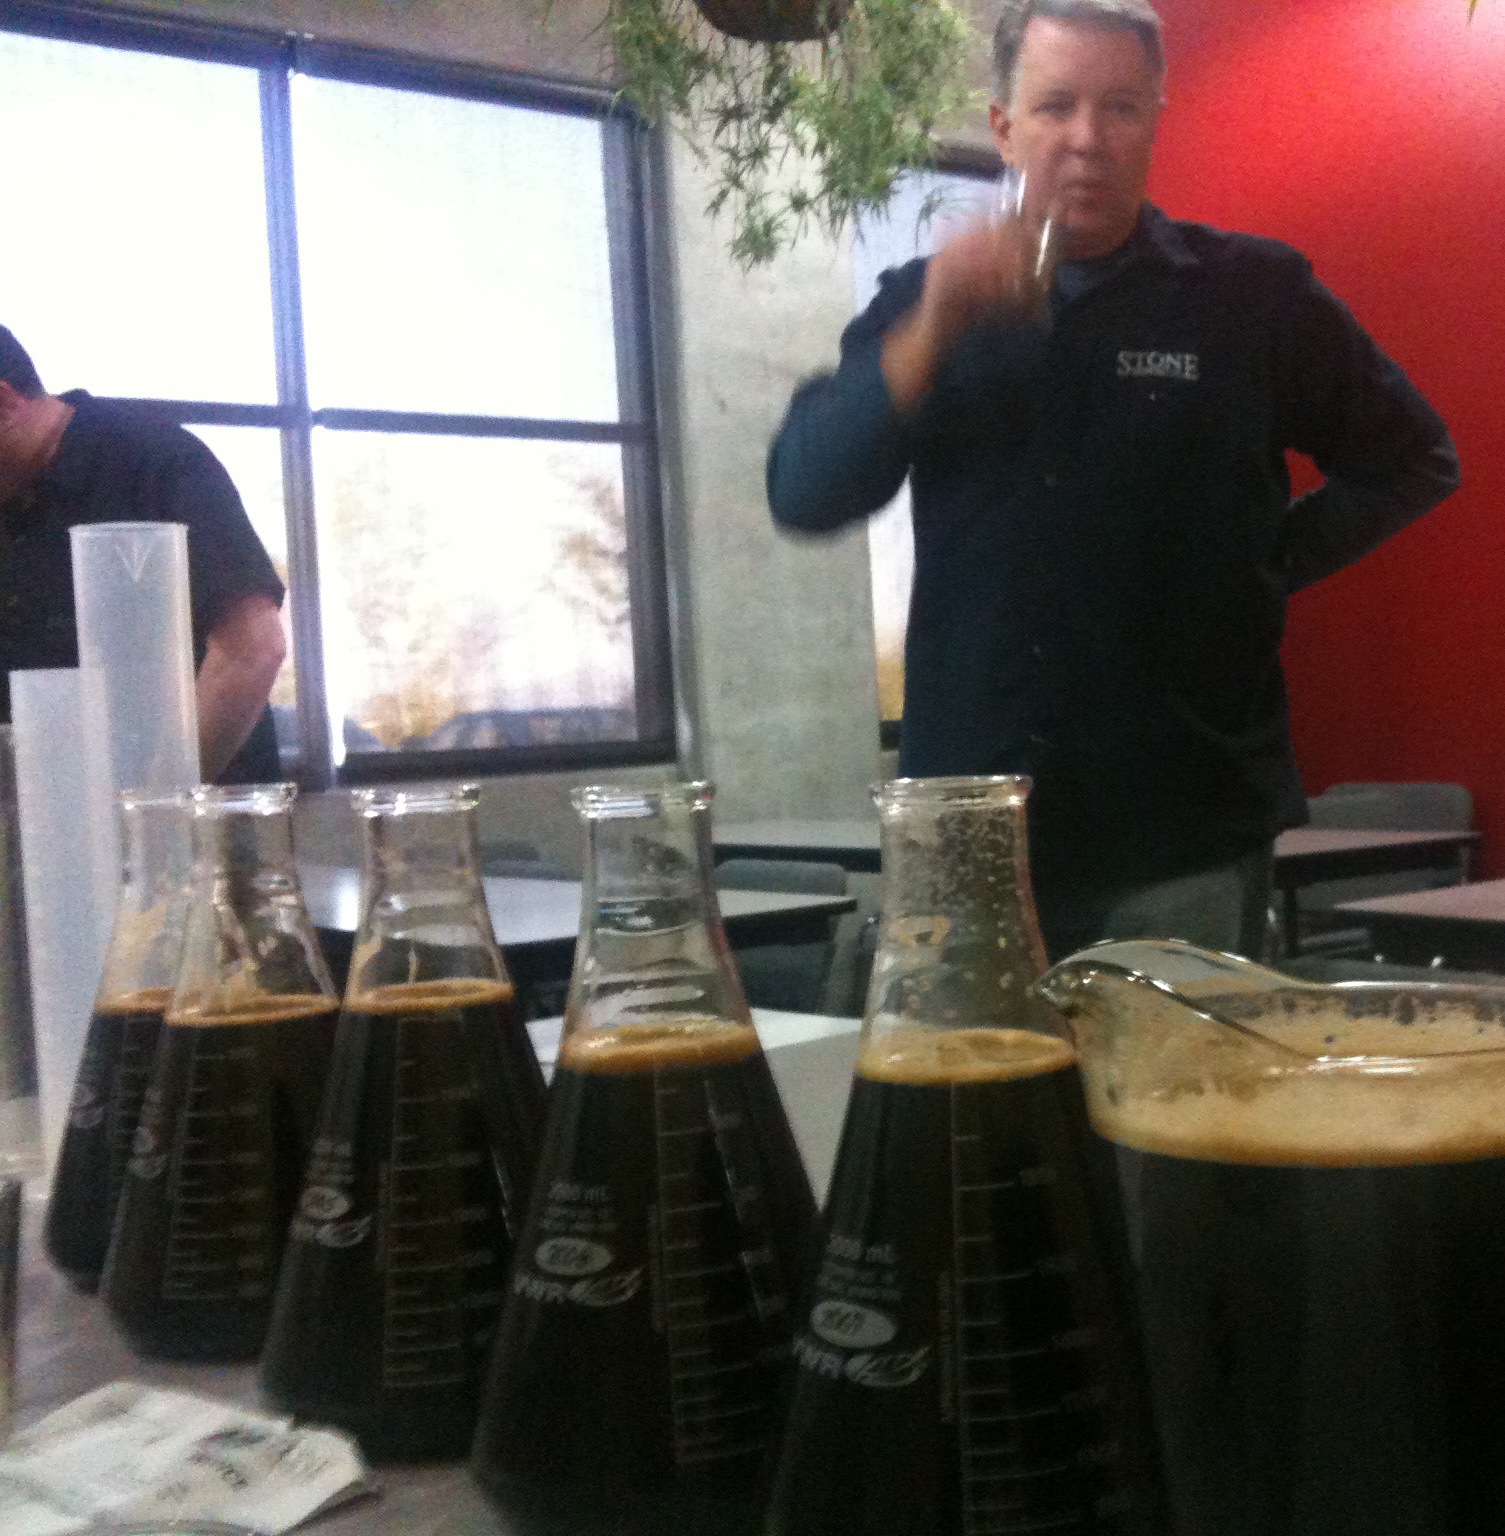 Stone President & Co-Founder Steve Wagner beging the daunting tasting process